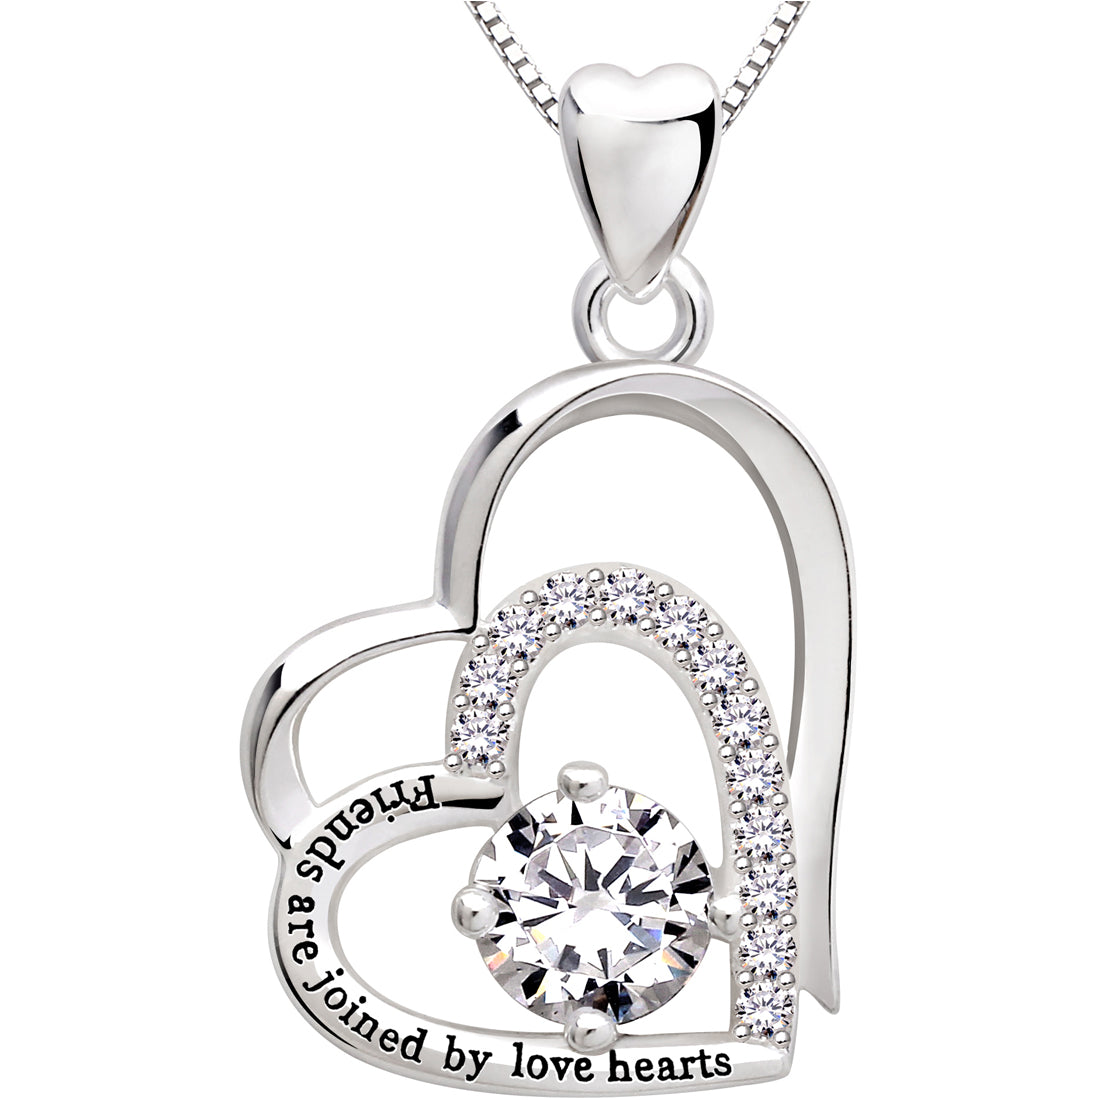 ALOV Jewelry Sterling Silver "Friends are joined by love hearts" Double Love Heart Cubic Zirconia Pendant Necklace